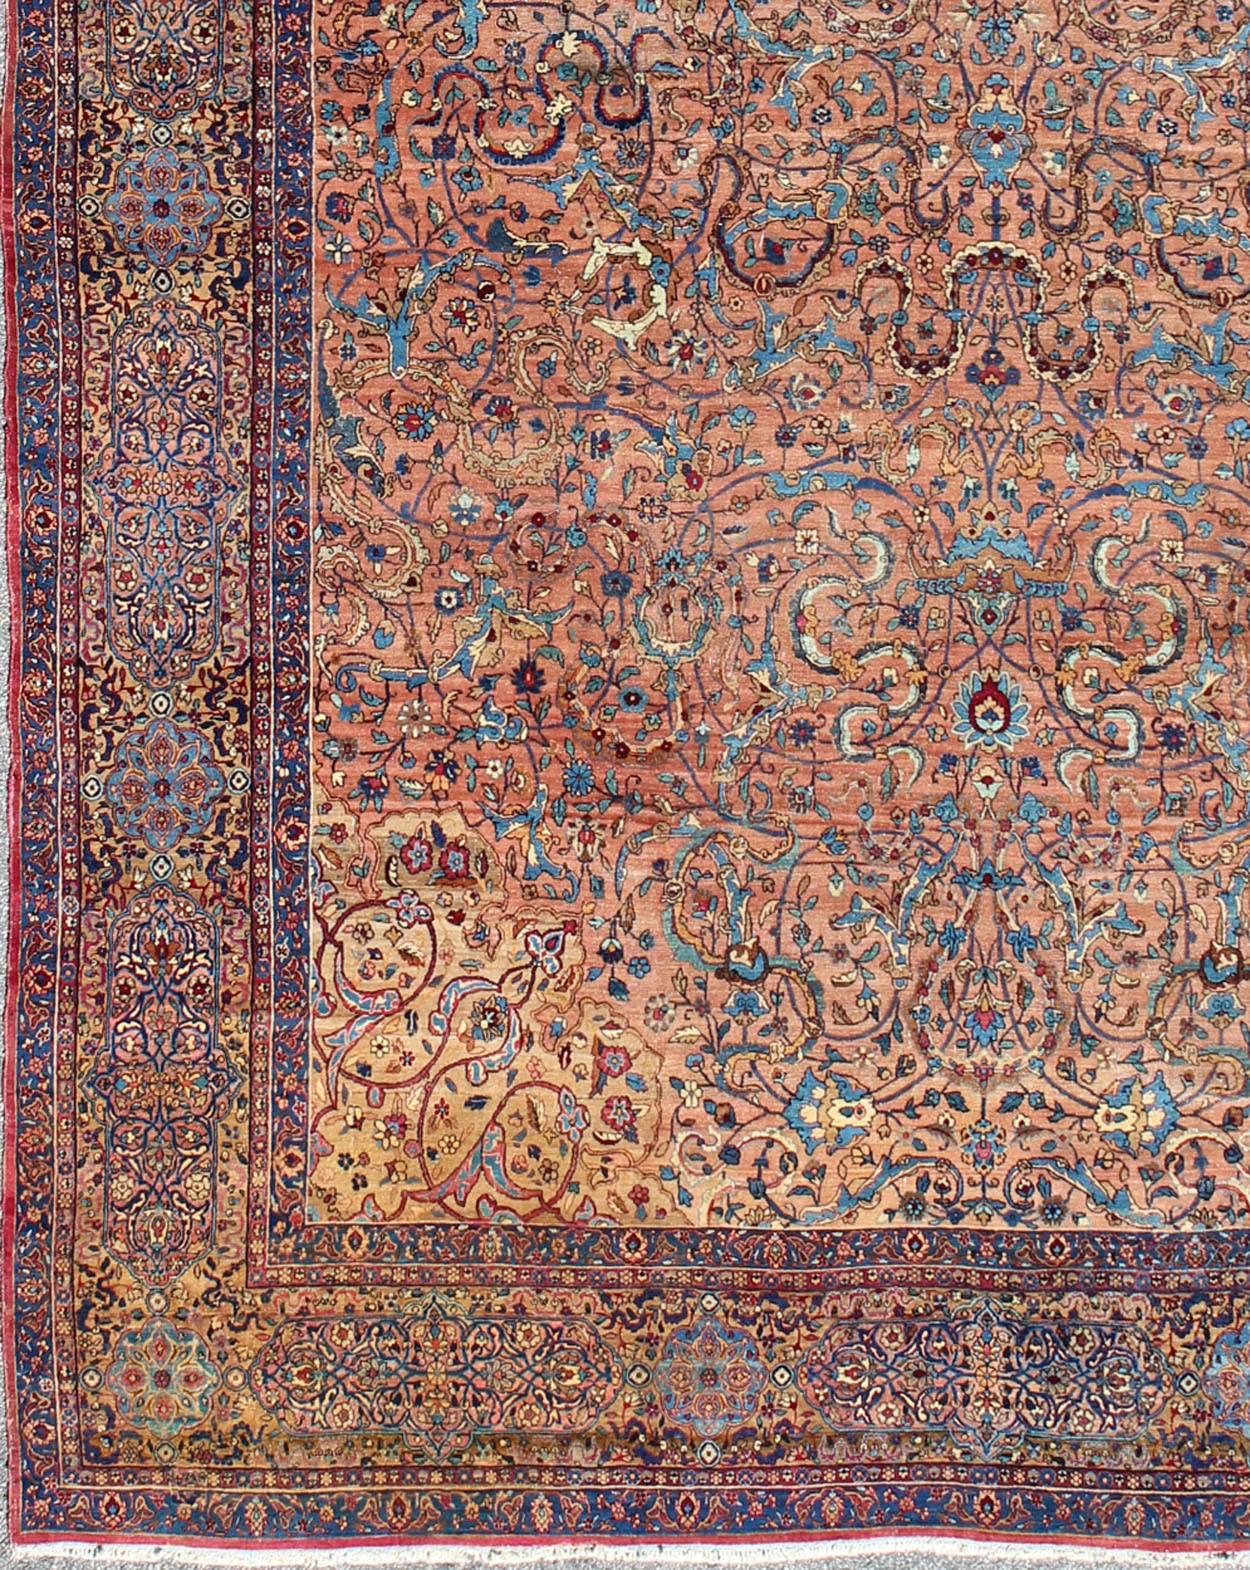  Classic Antique Lavar Kerman Large Persian Rug with amazing intricacy. rug / S12-0903, Traditional Persian Large Rug. 

This magnificent antique Lavar Kerman carpet is an stunning achievement of Persian classical craftsmanship and design from